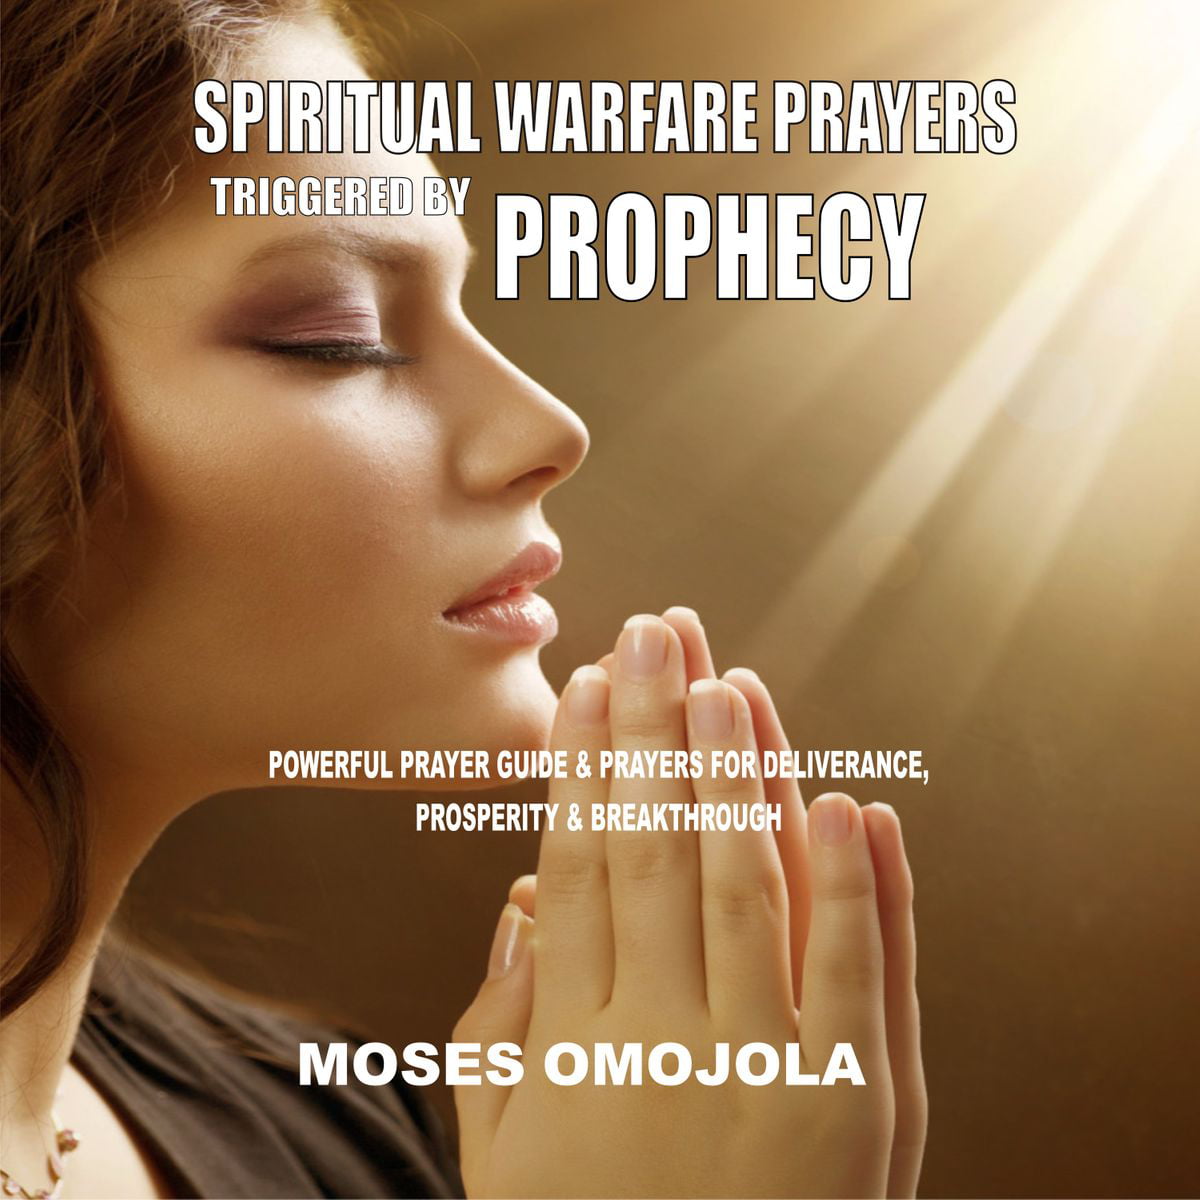 Spiritual Warfare Prayers Triggered By Prophecy Powerful Prayer Guide & Prayers for Deliverance